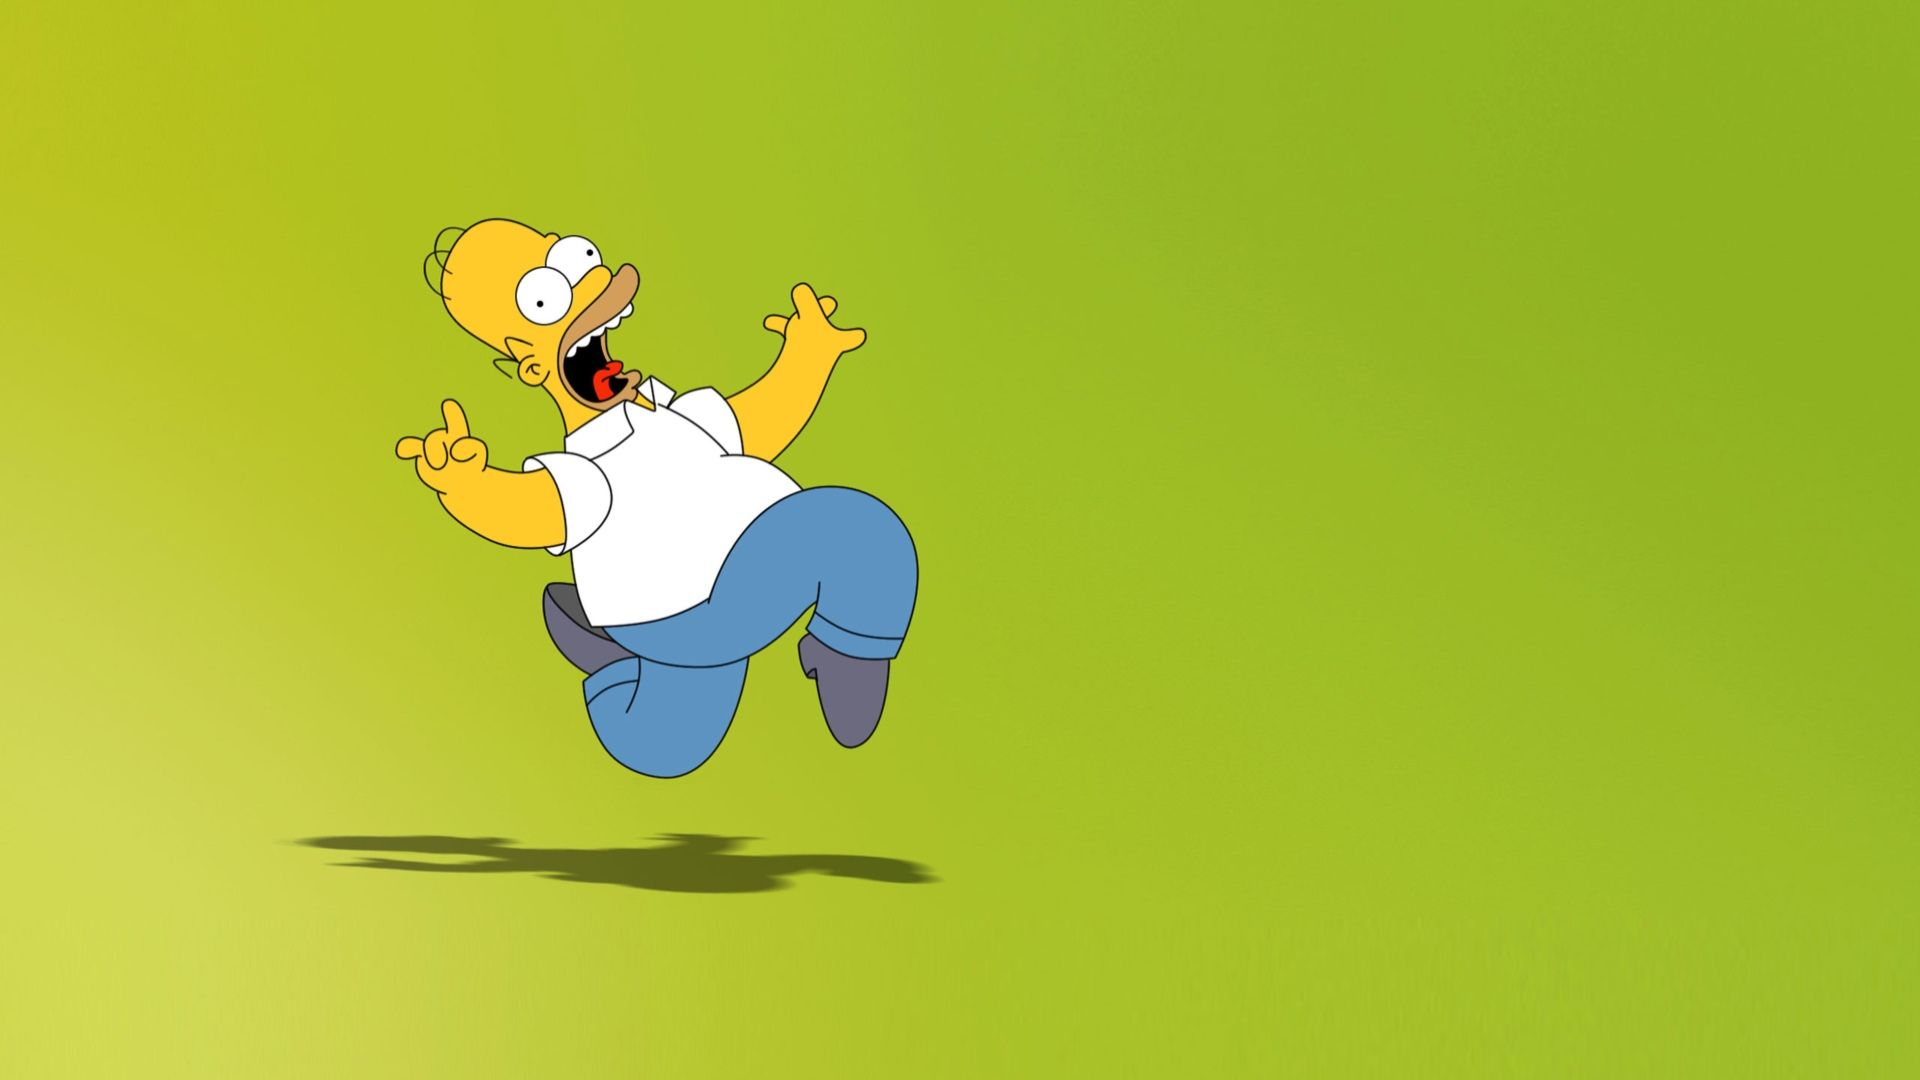 Homer Simpson Meme Wallpaper + The Voice Behind the Character!